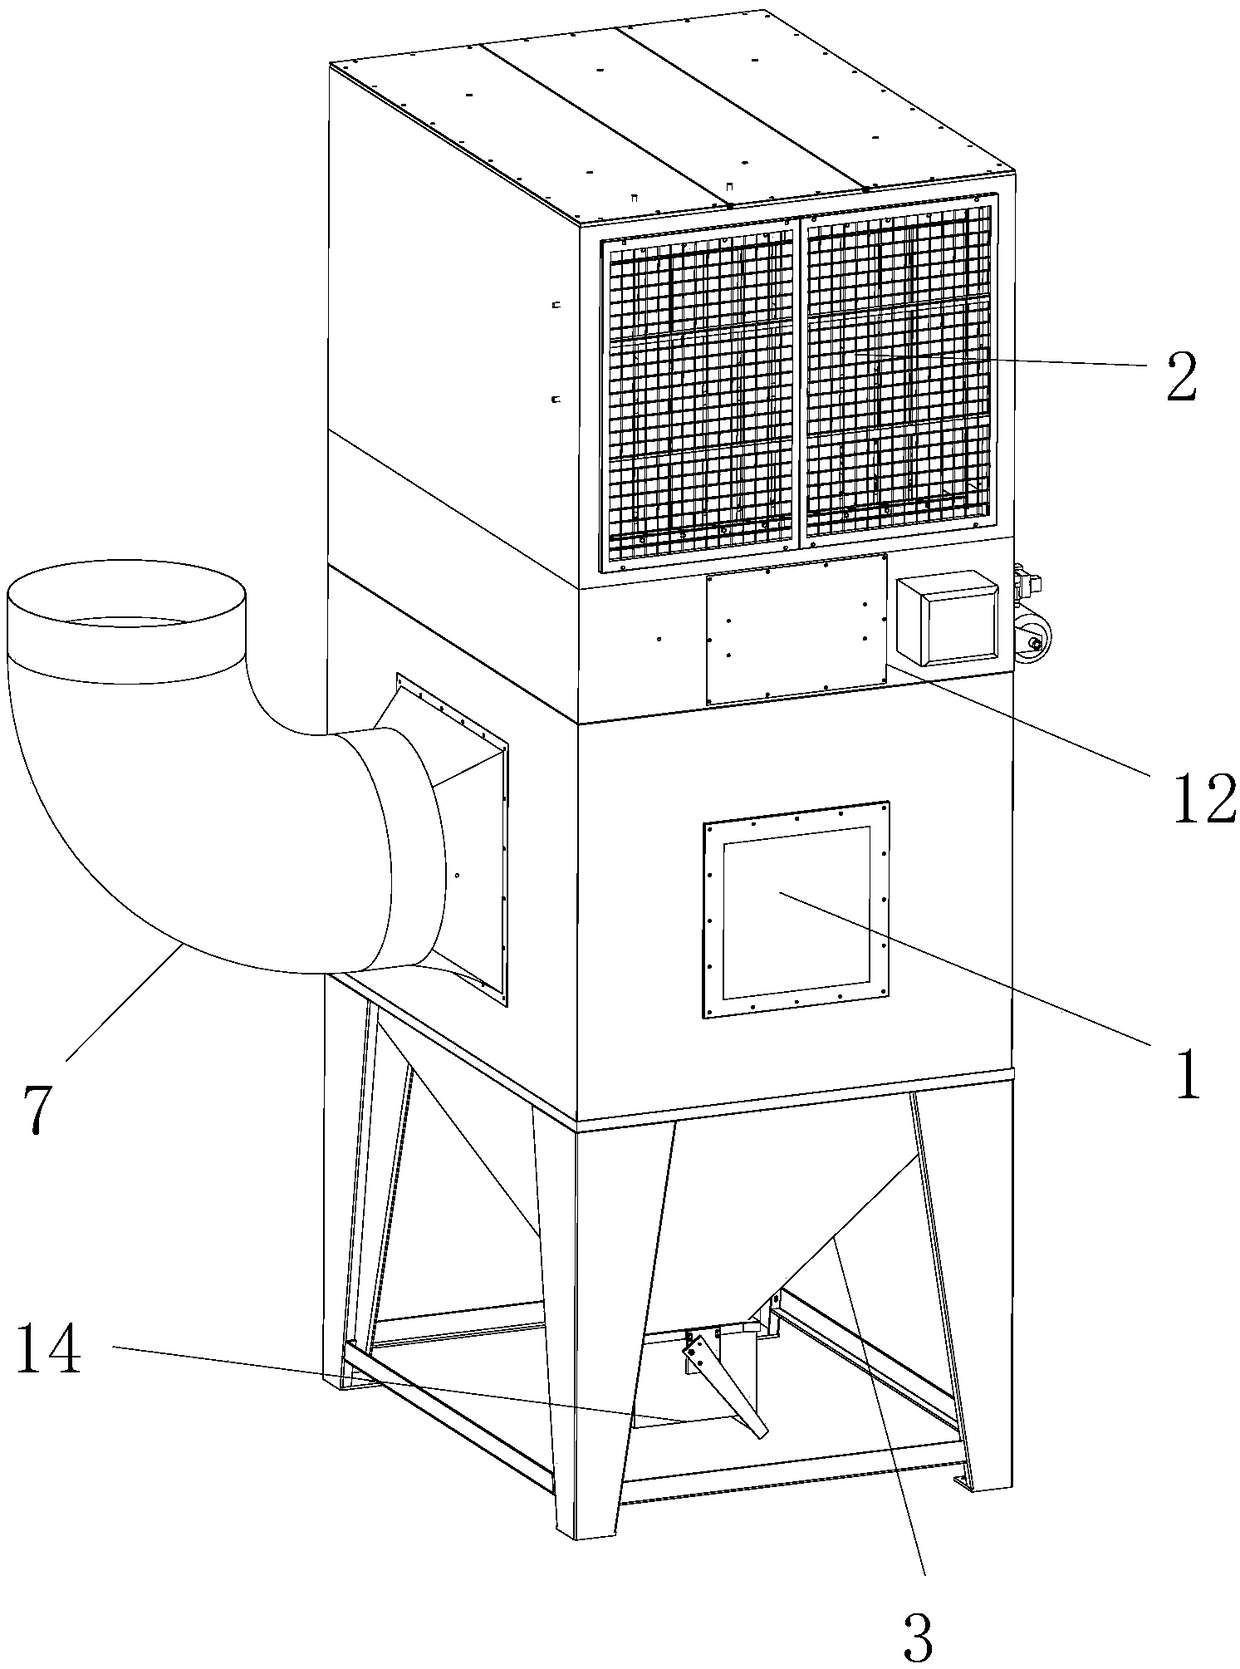 Dust filtering device